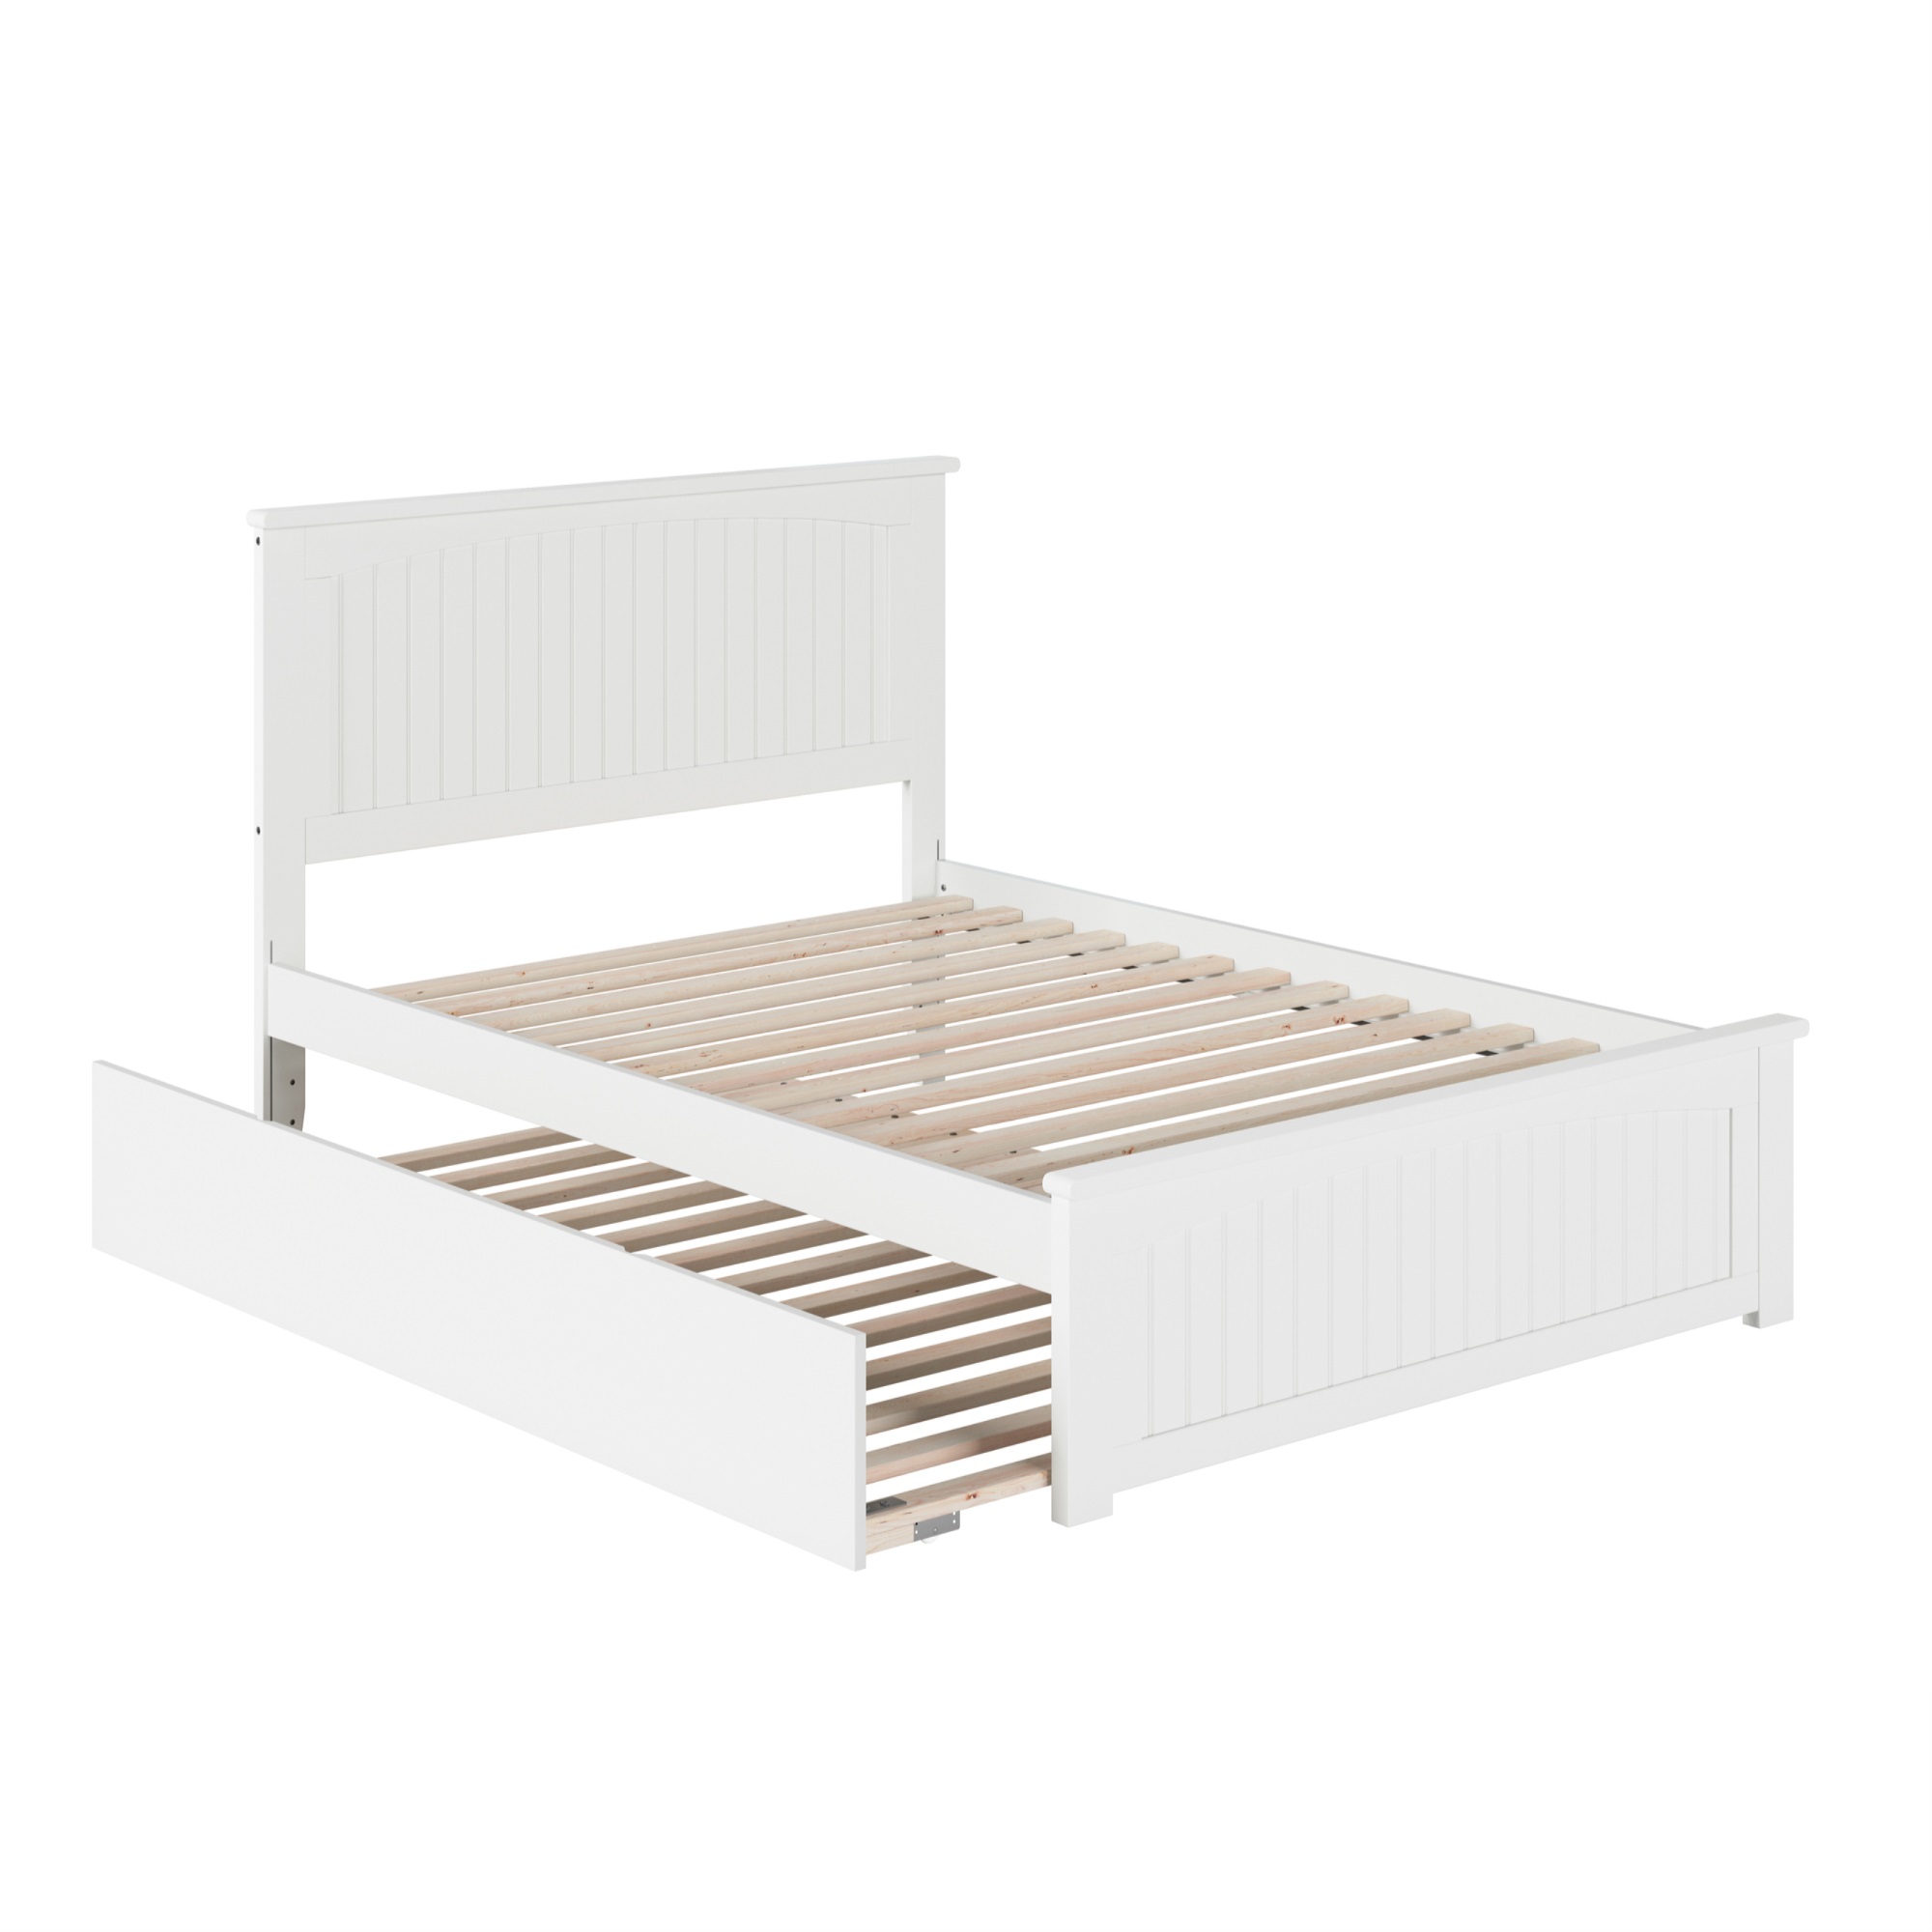 Atlantic Full Platform Bed, Matching Foot Board, Full Size Urban Trundle Bed, White